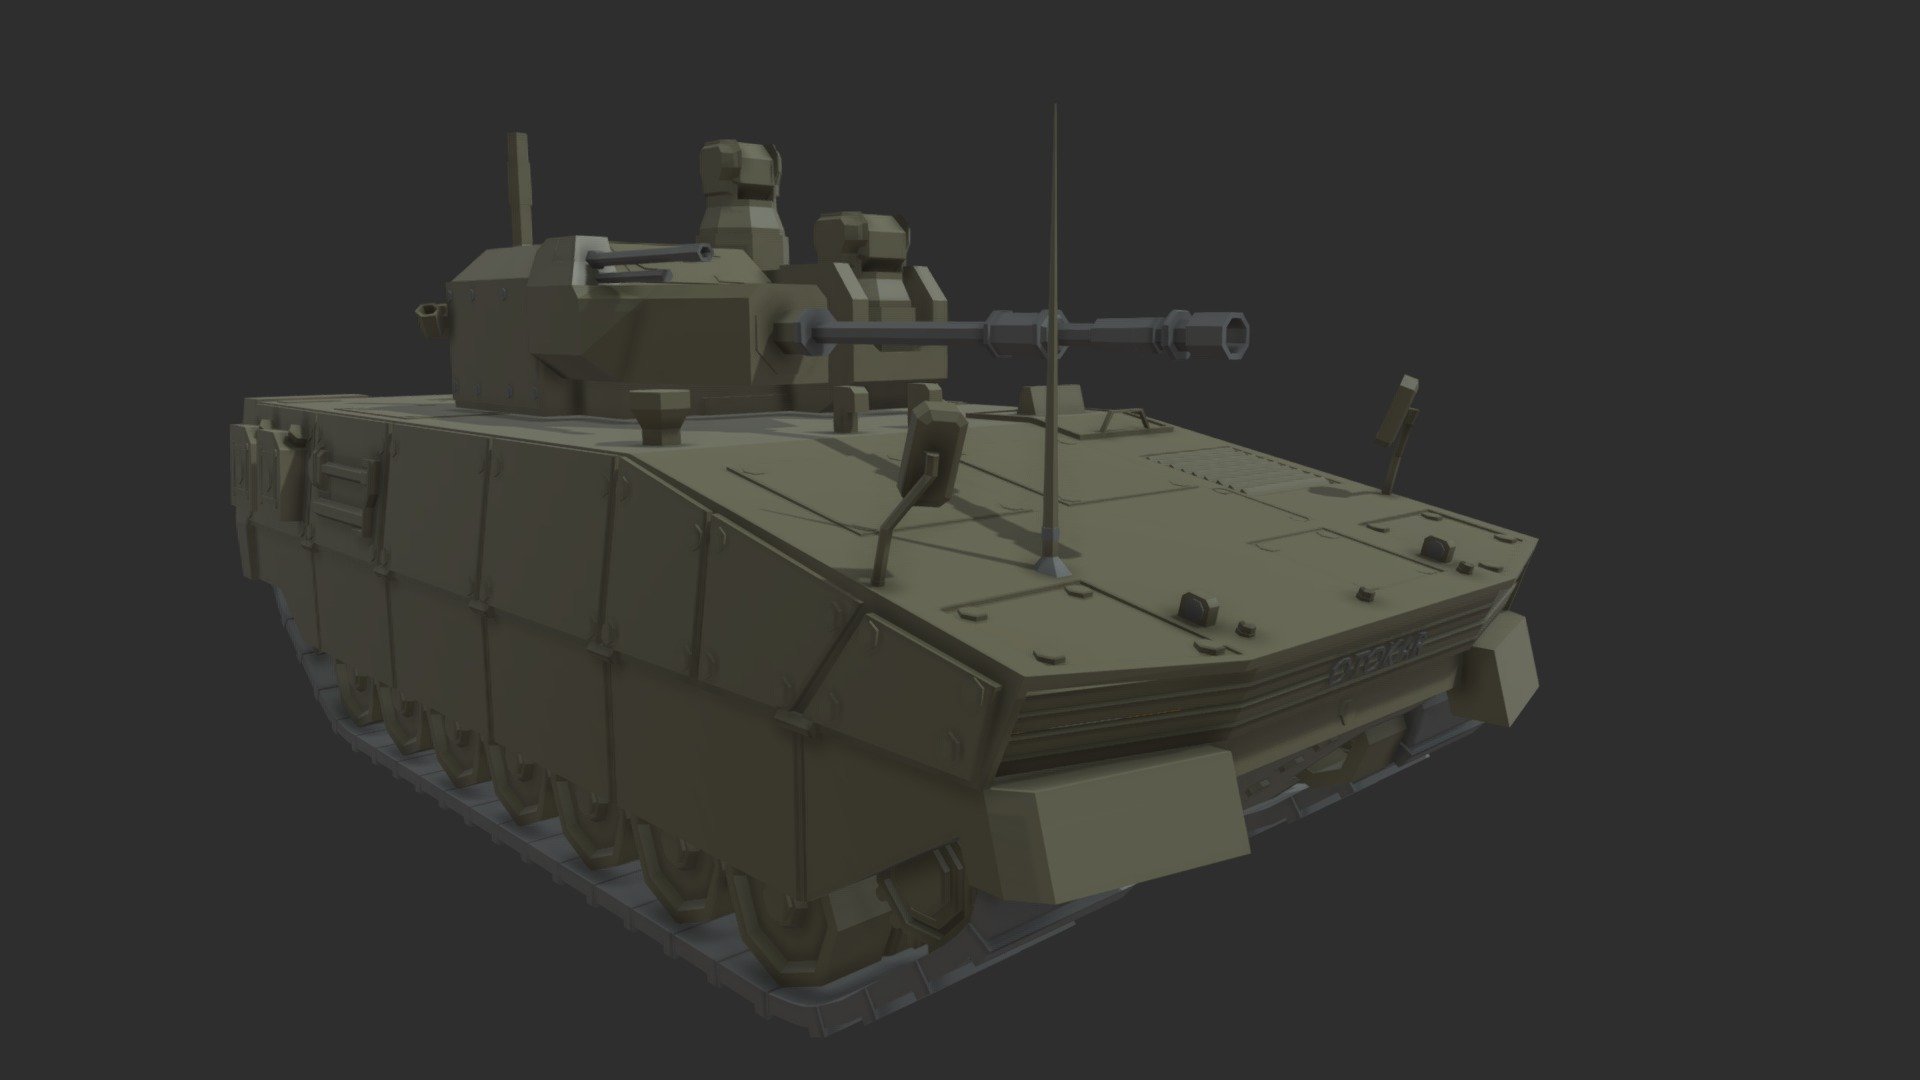 The Tulpar IFV was made to support the new Turkish Altay MBT at the time when they were both produced by Otokar. But guess who is not currently making the Altay MBT. Yeaah.. Tulpar will probably not see any use in the TAF because FNSS is already supplementing them with loads of armored vehicles. Maybe they'll export it to some random Central Asian Country.

Its probably not very accurate since no blueprint of the vehicle exists and i had to model it from a very low res side view 3d model